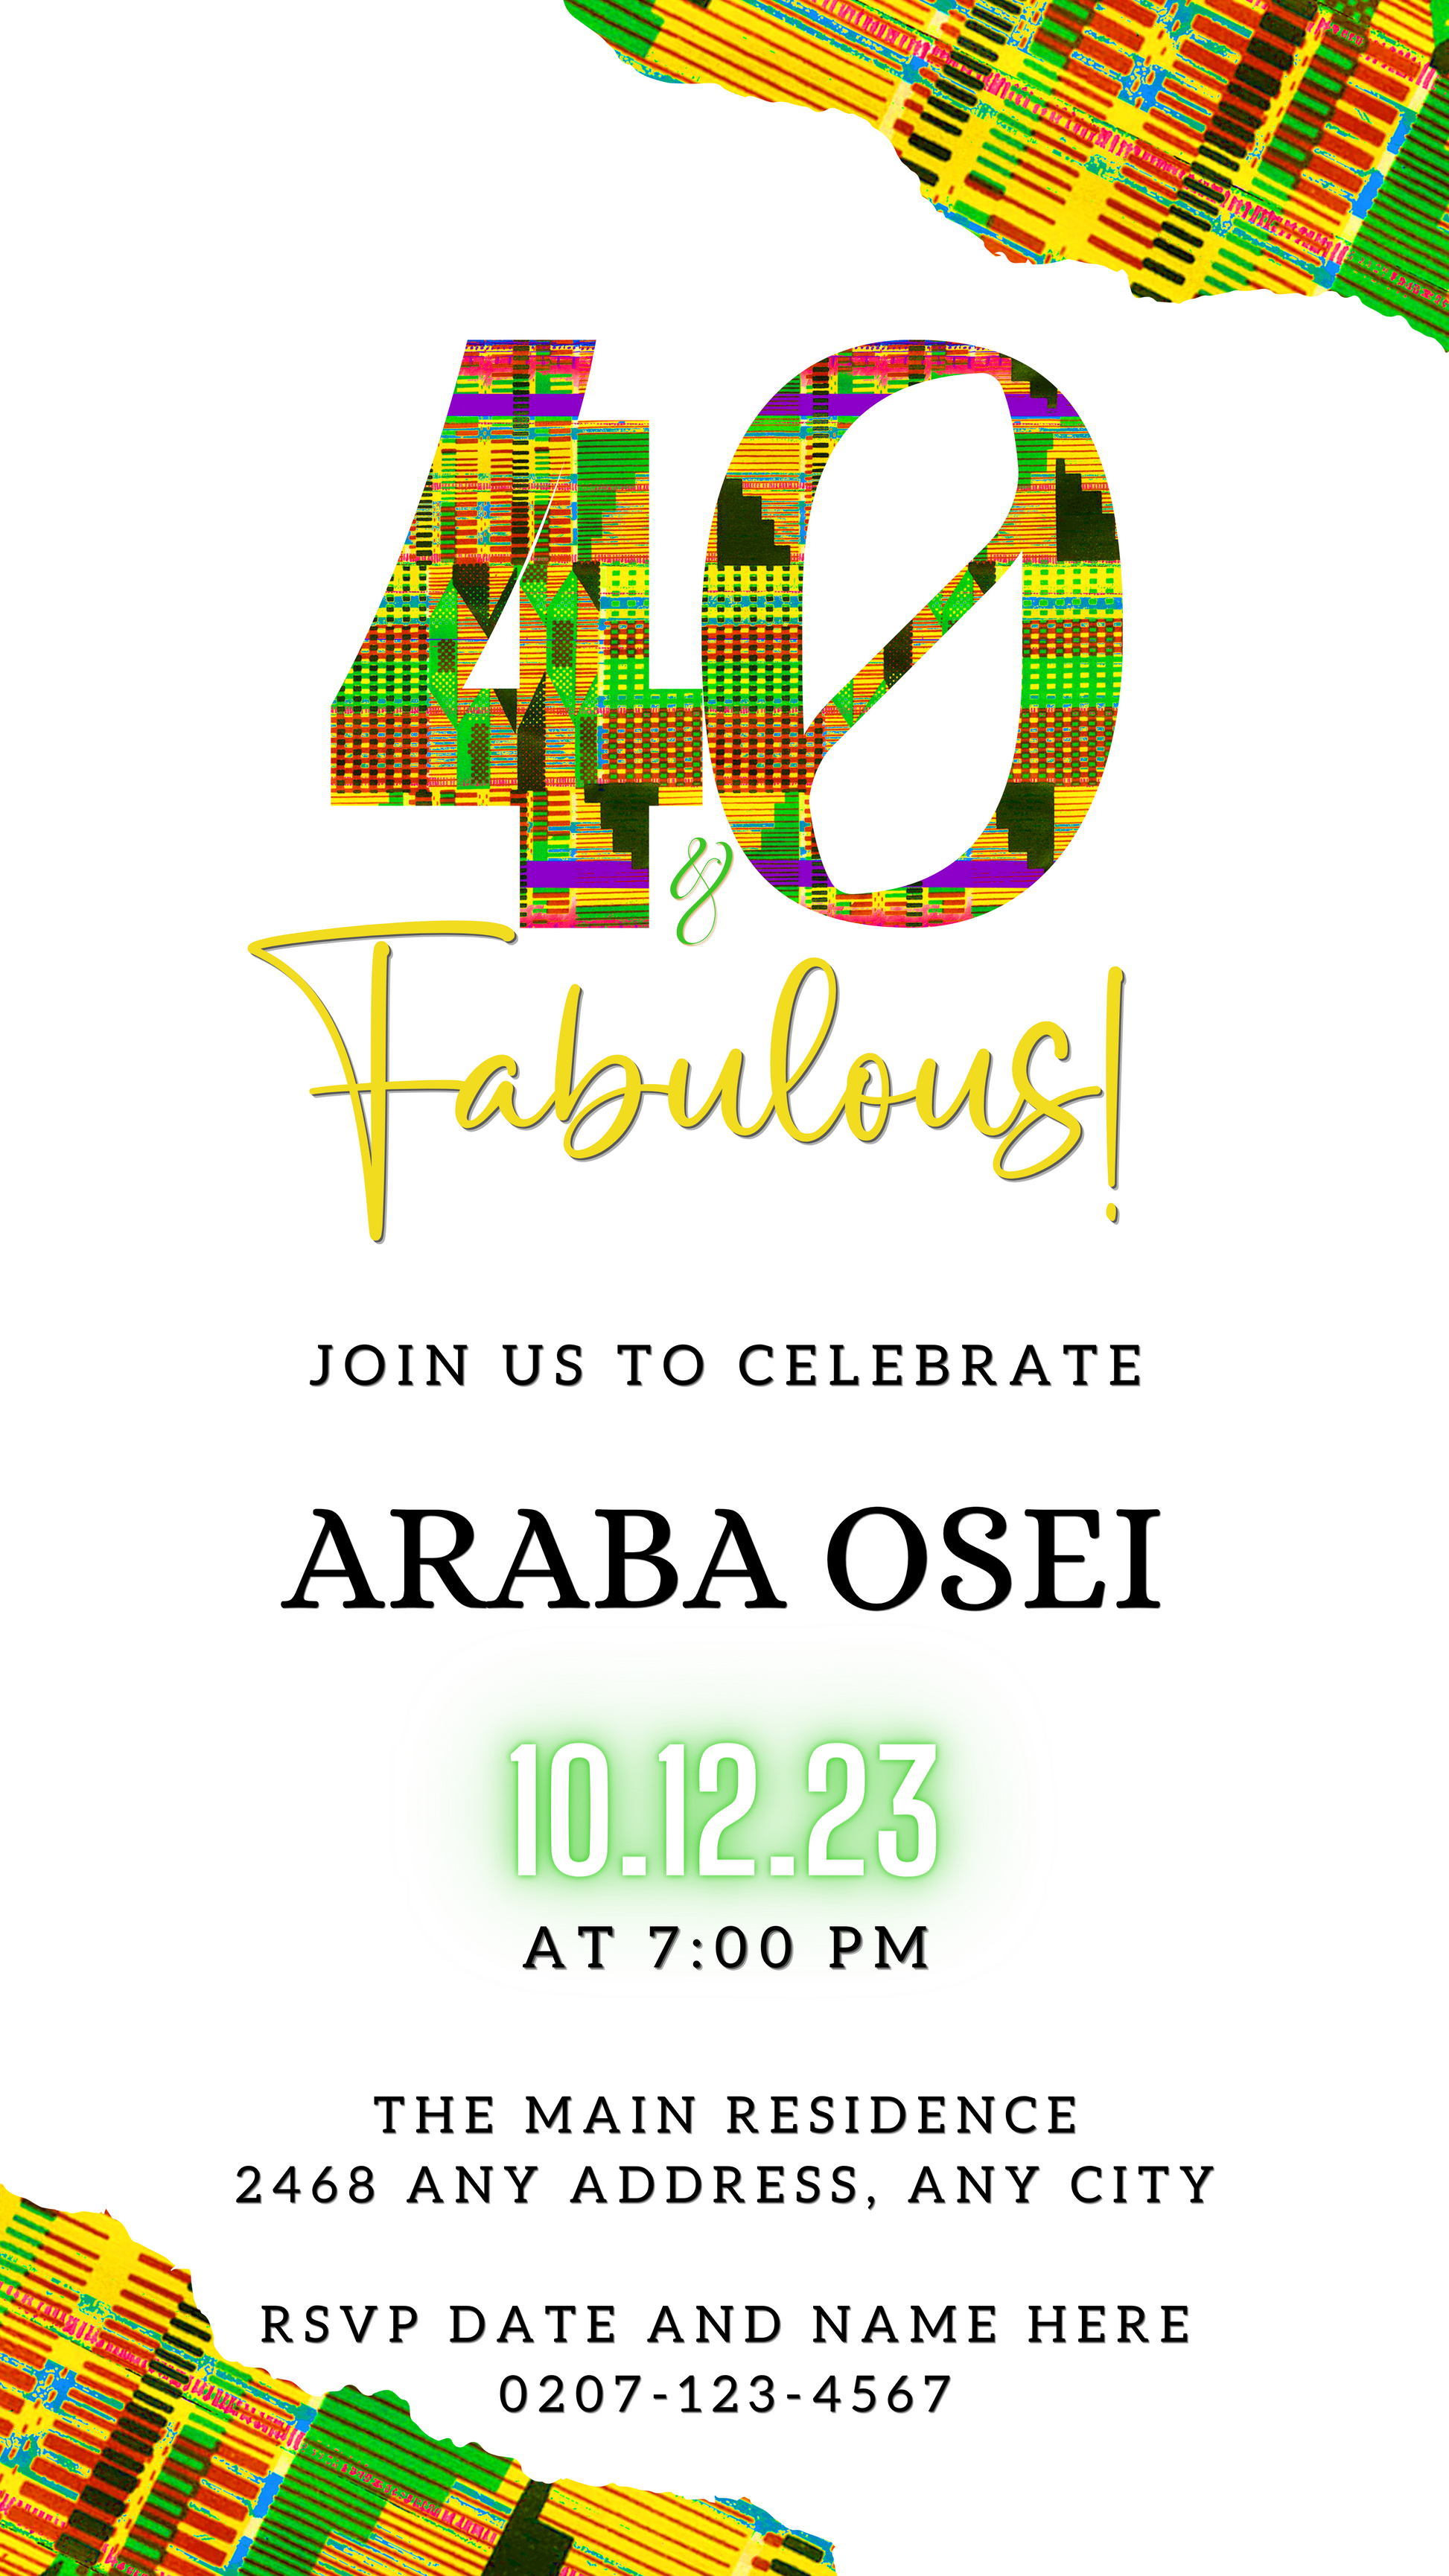 White Green Yellow Kente | 40 & Fabulous Party Evite template featuring customizable text and numbers for digital invitations, editable via Canva for smartphones.